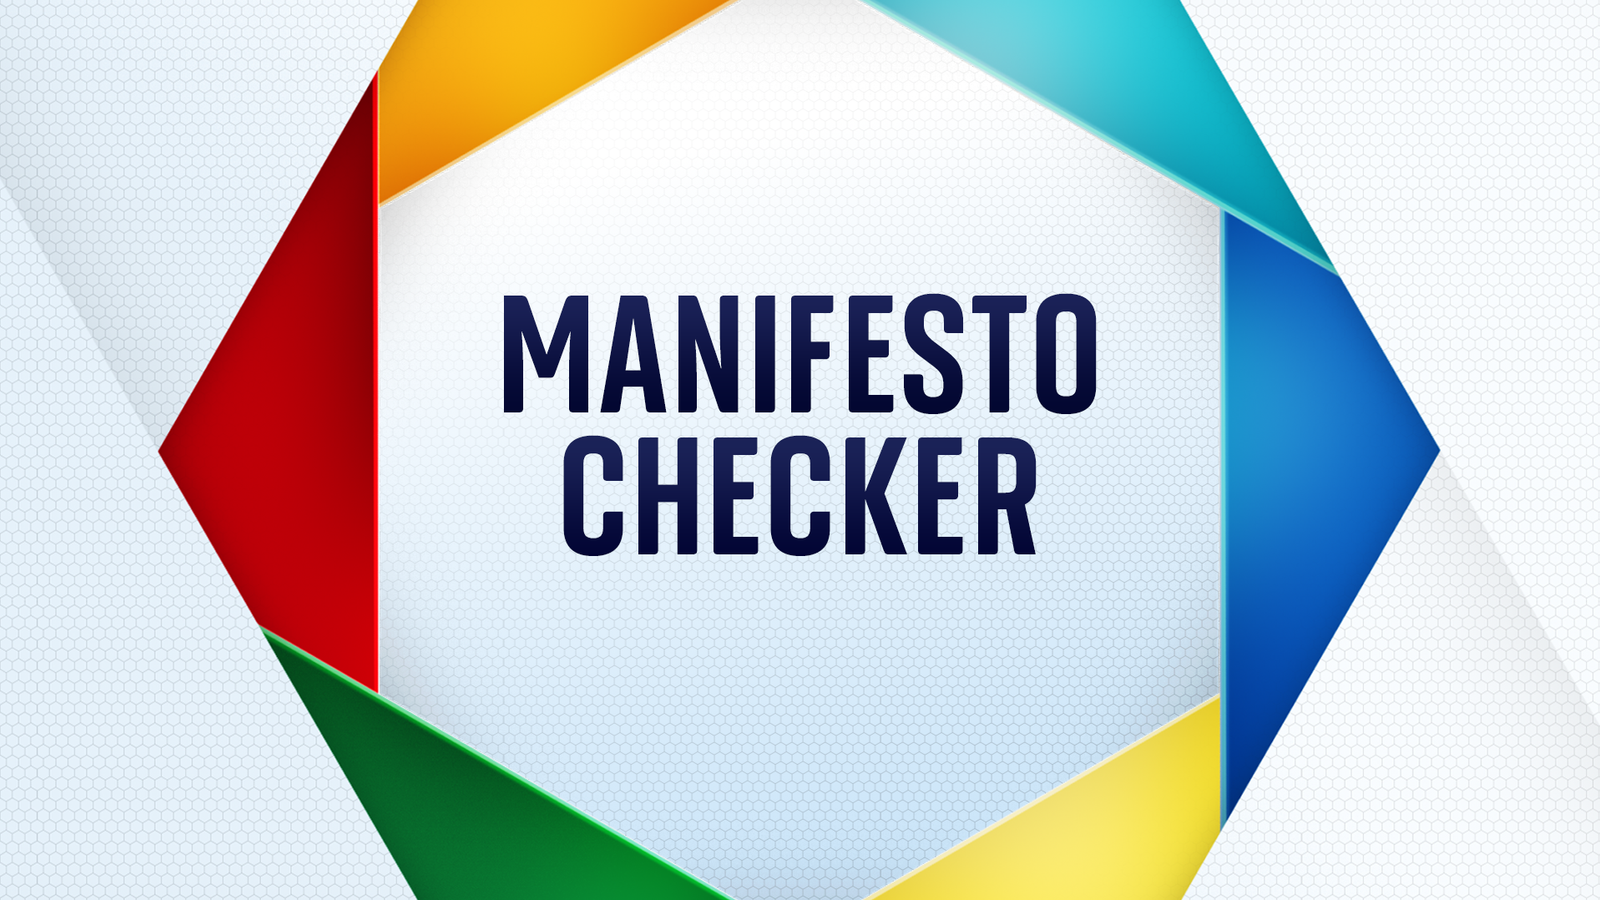 Manifesto checker: What are the Labour, Greens', Conservatives' and Liberal Democrats' key pledges?